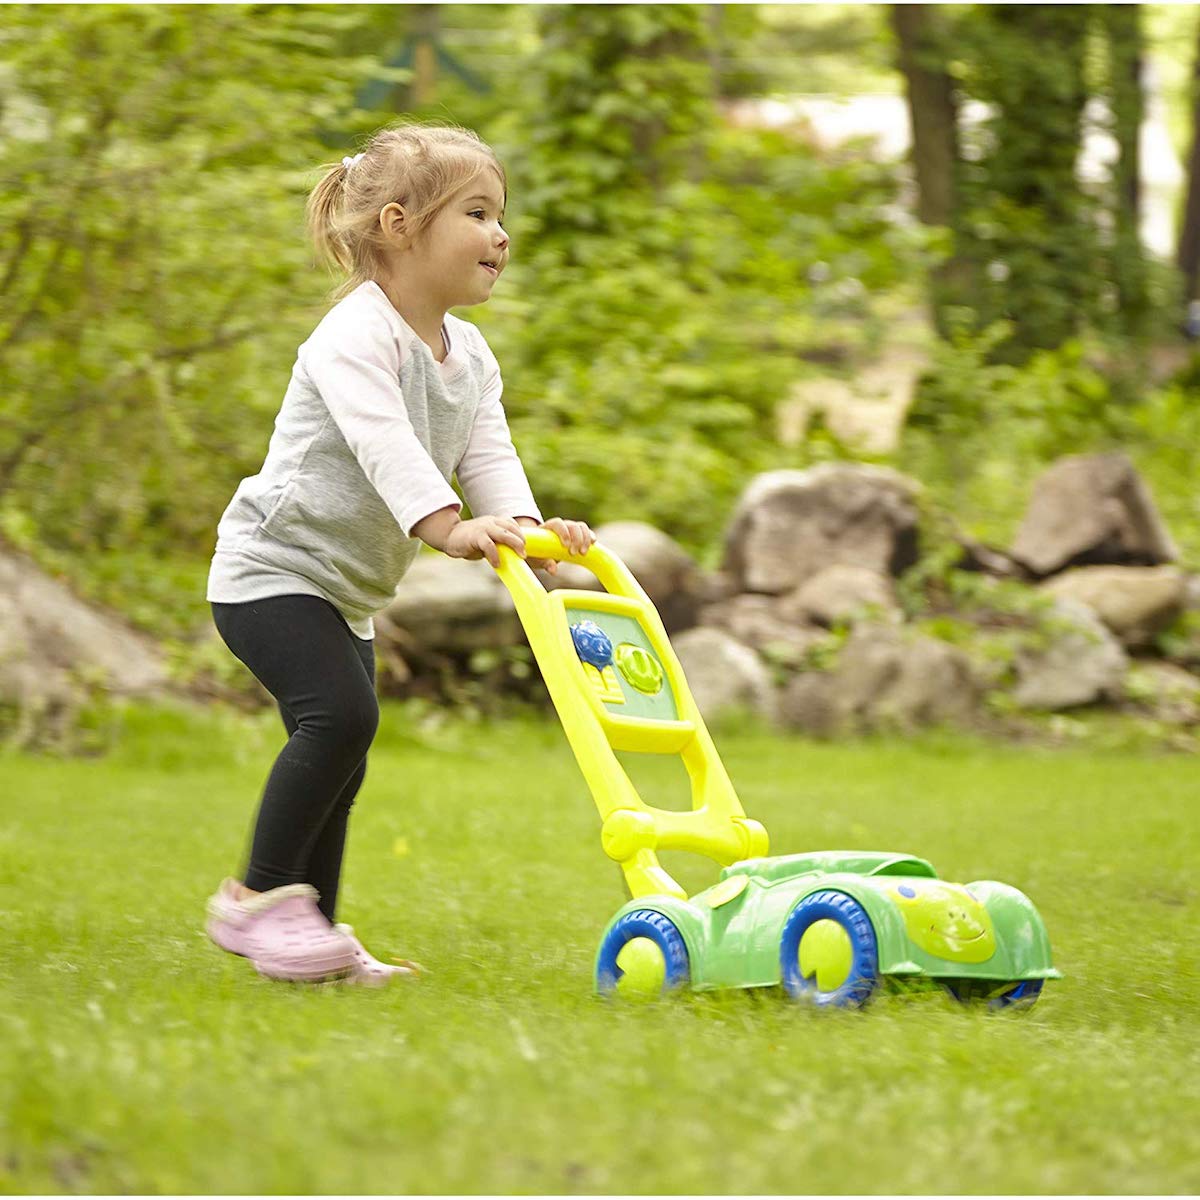 girl pushing Melissa & Doug Sunny Patch Snappy Turtle Mower in grass